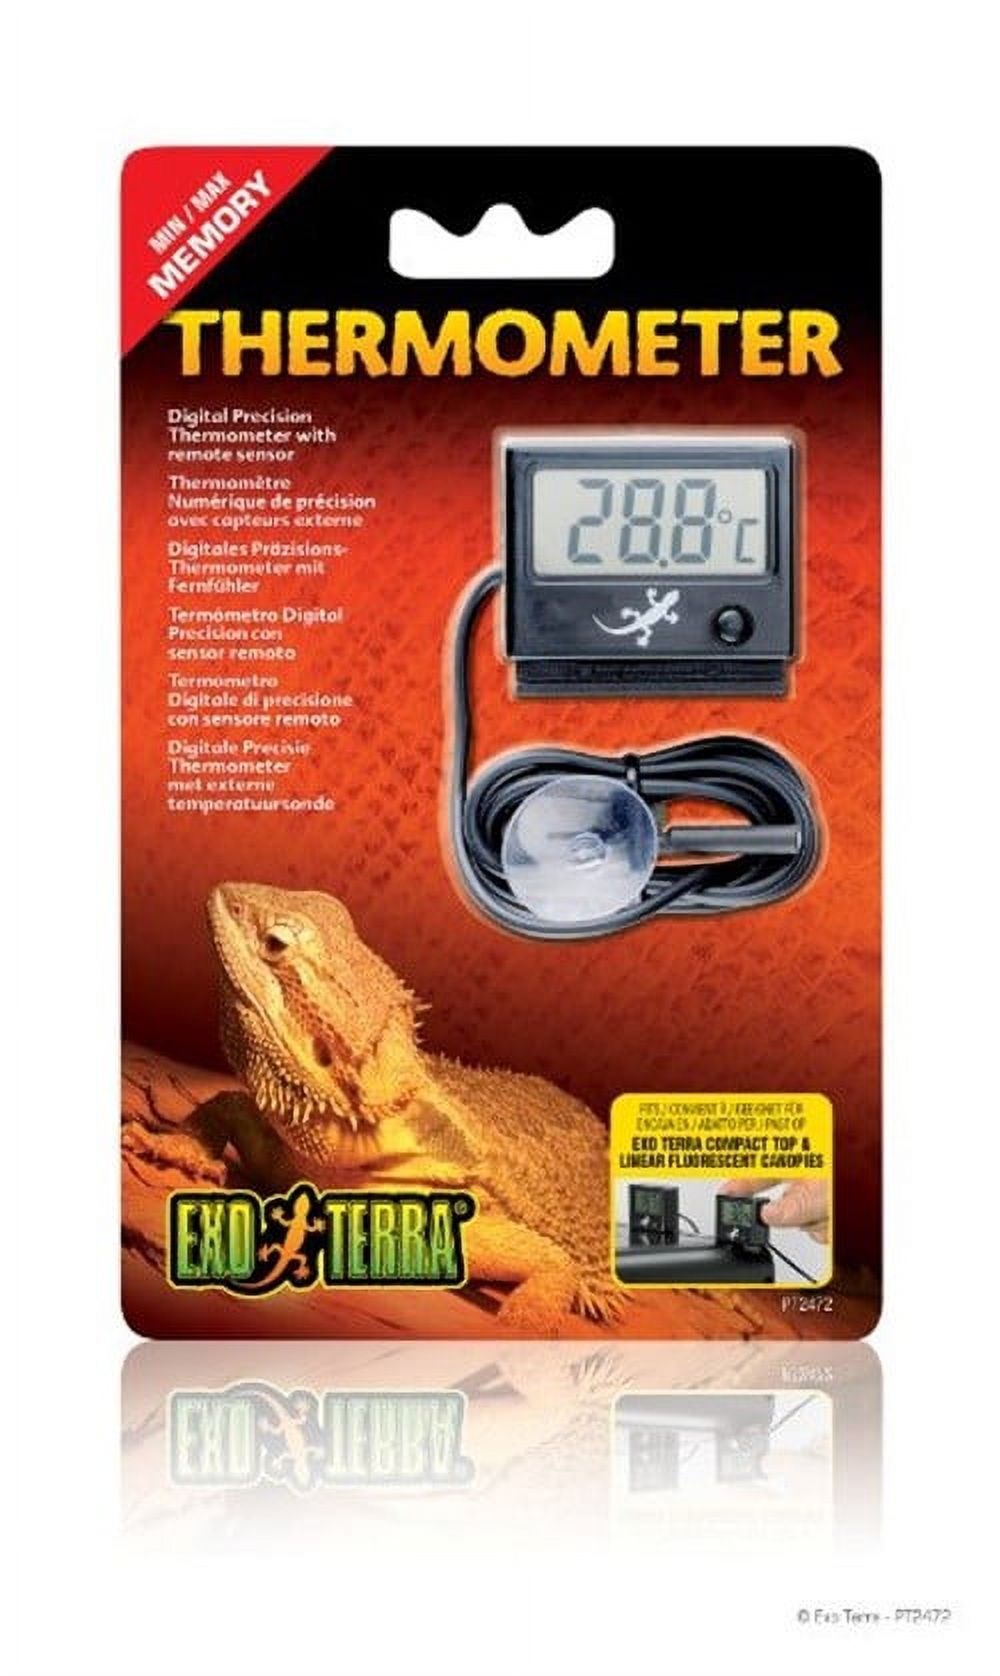 Exo Terra Digital Thermometer with Probe, Celsius and Fahrenheit - image 1 of 2